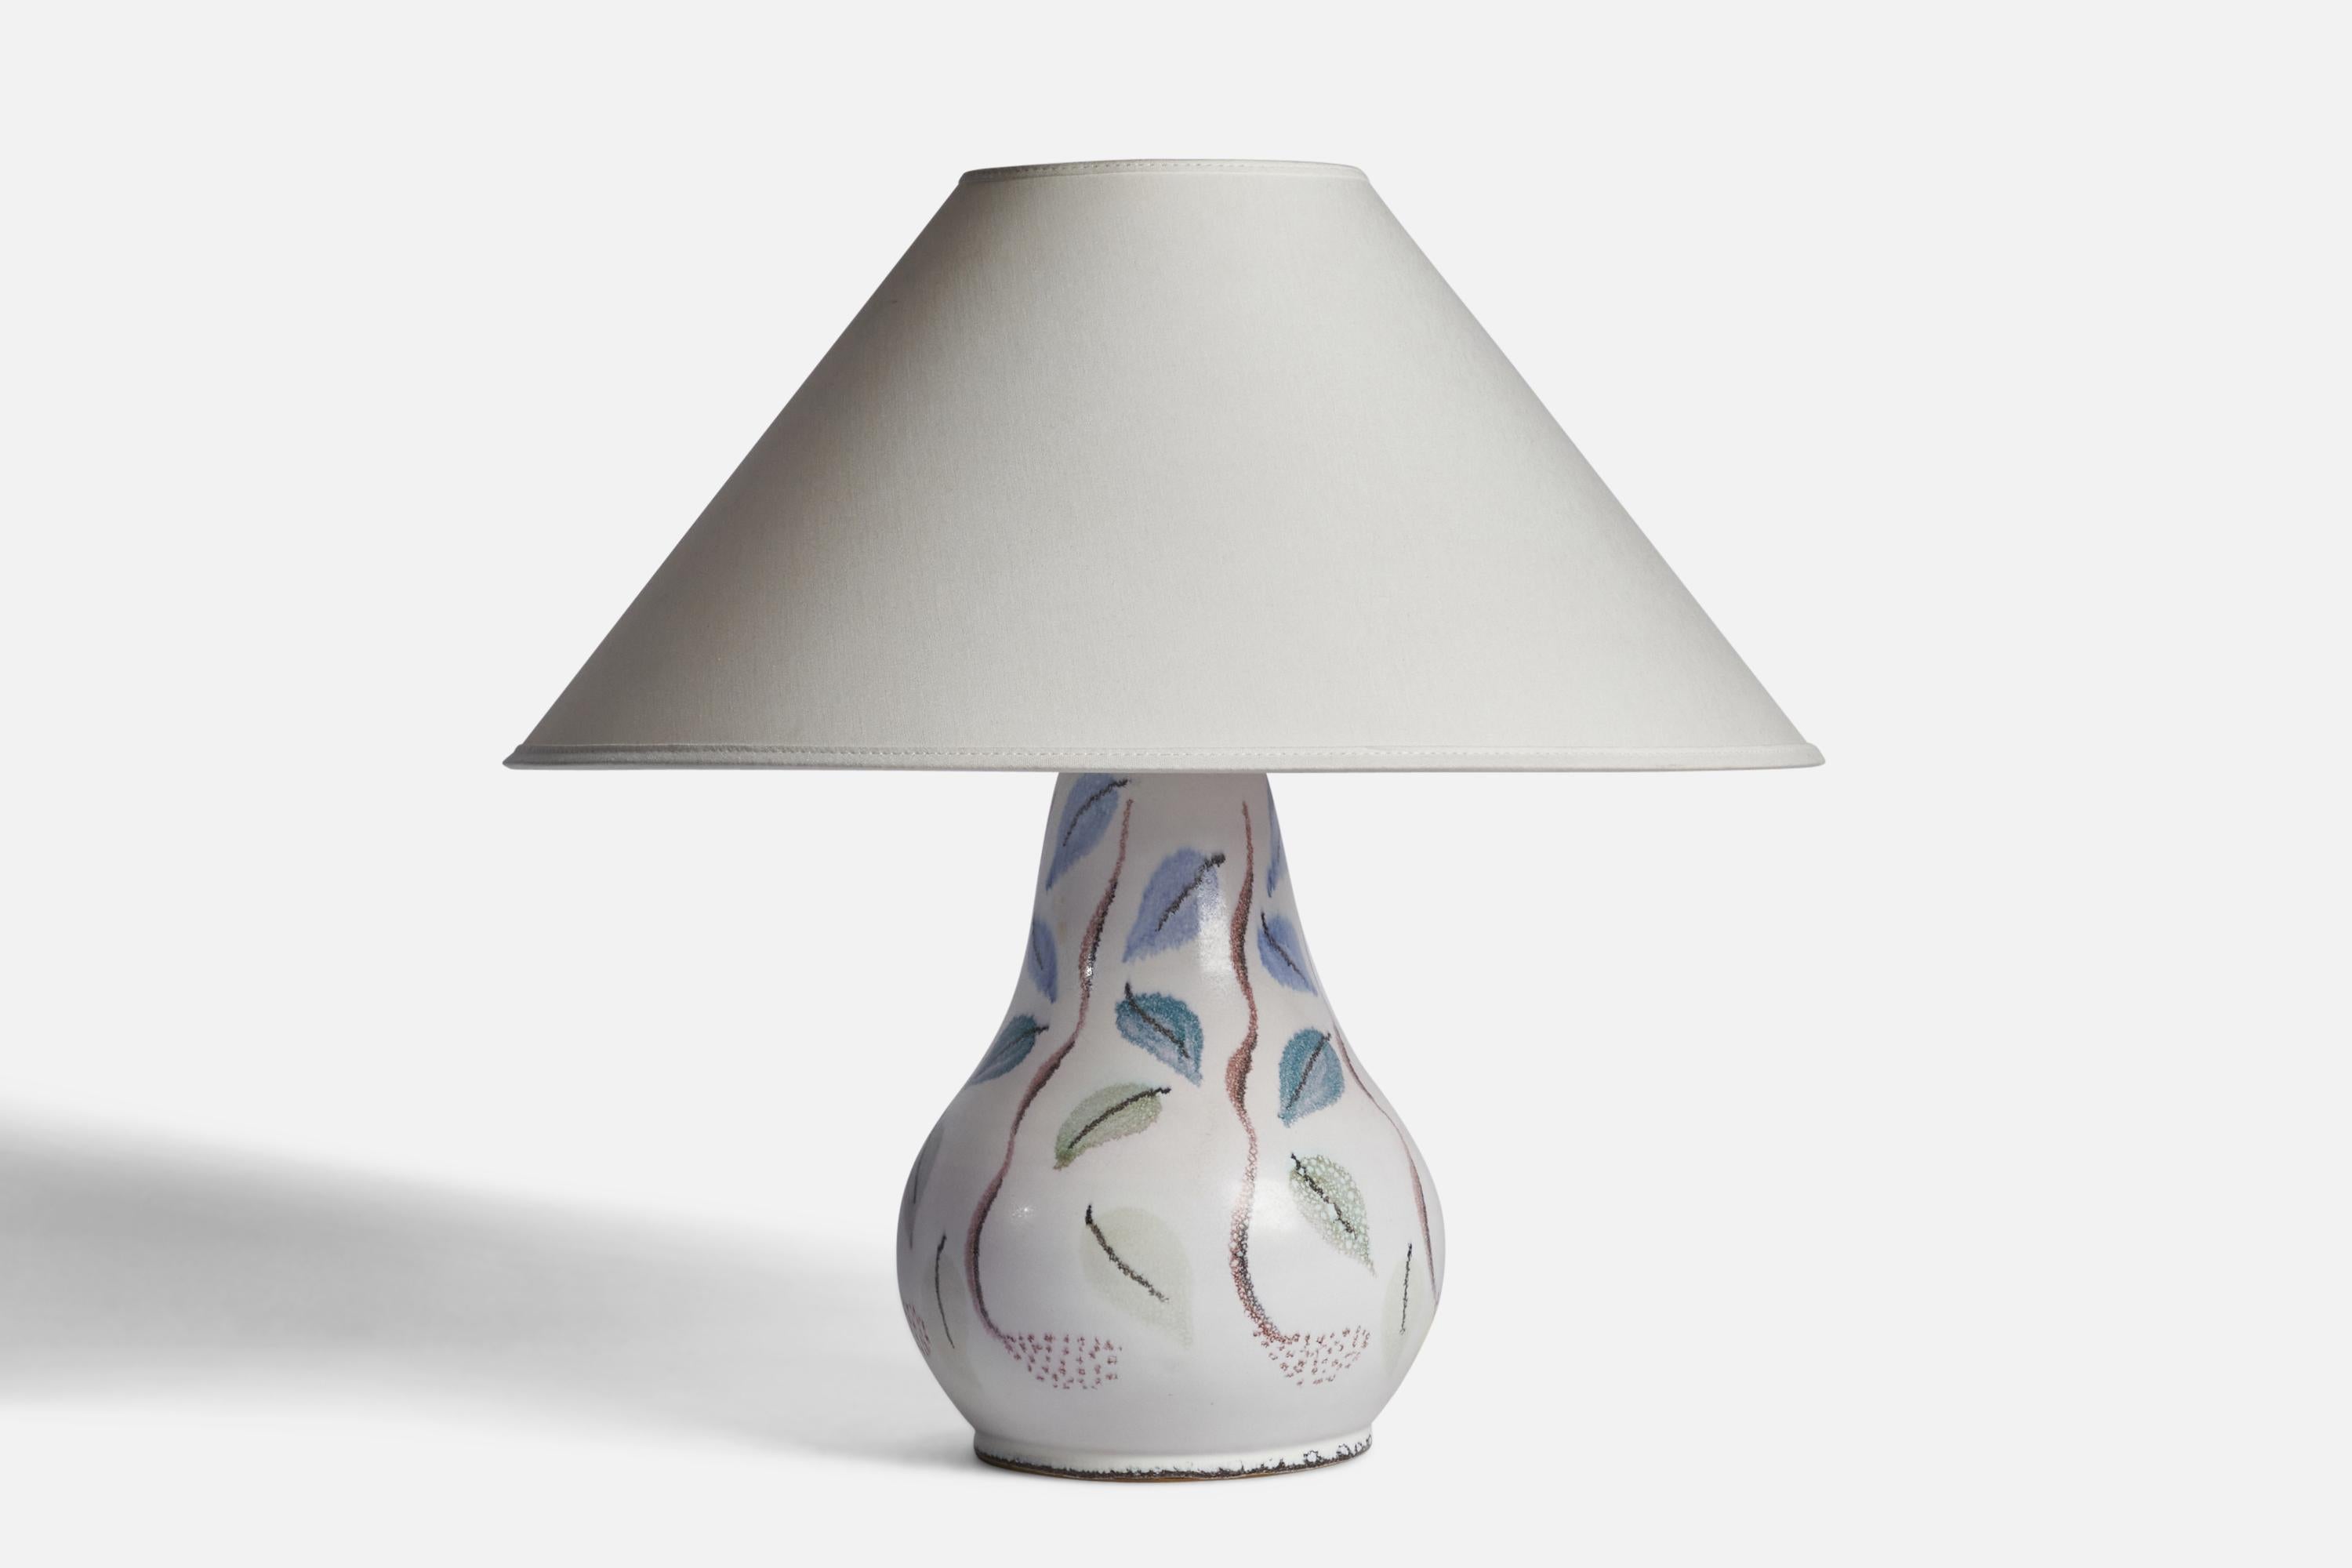 A white green blue and brown-painted porcelain table lamp designed and produced in Denmark, 1950s.

Dimensions of Lamp (inches): 11 H x 6.75” Diameter
Dimensions of Shade (inches): 4.5” Top Diameter x 16” Bottom Diameter x 7.25” H
Dimensions of Lamp